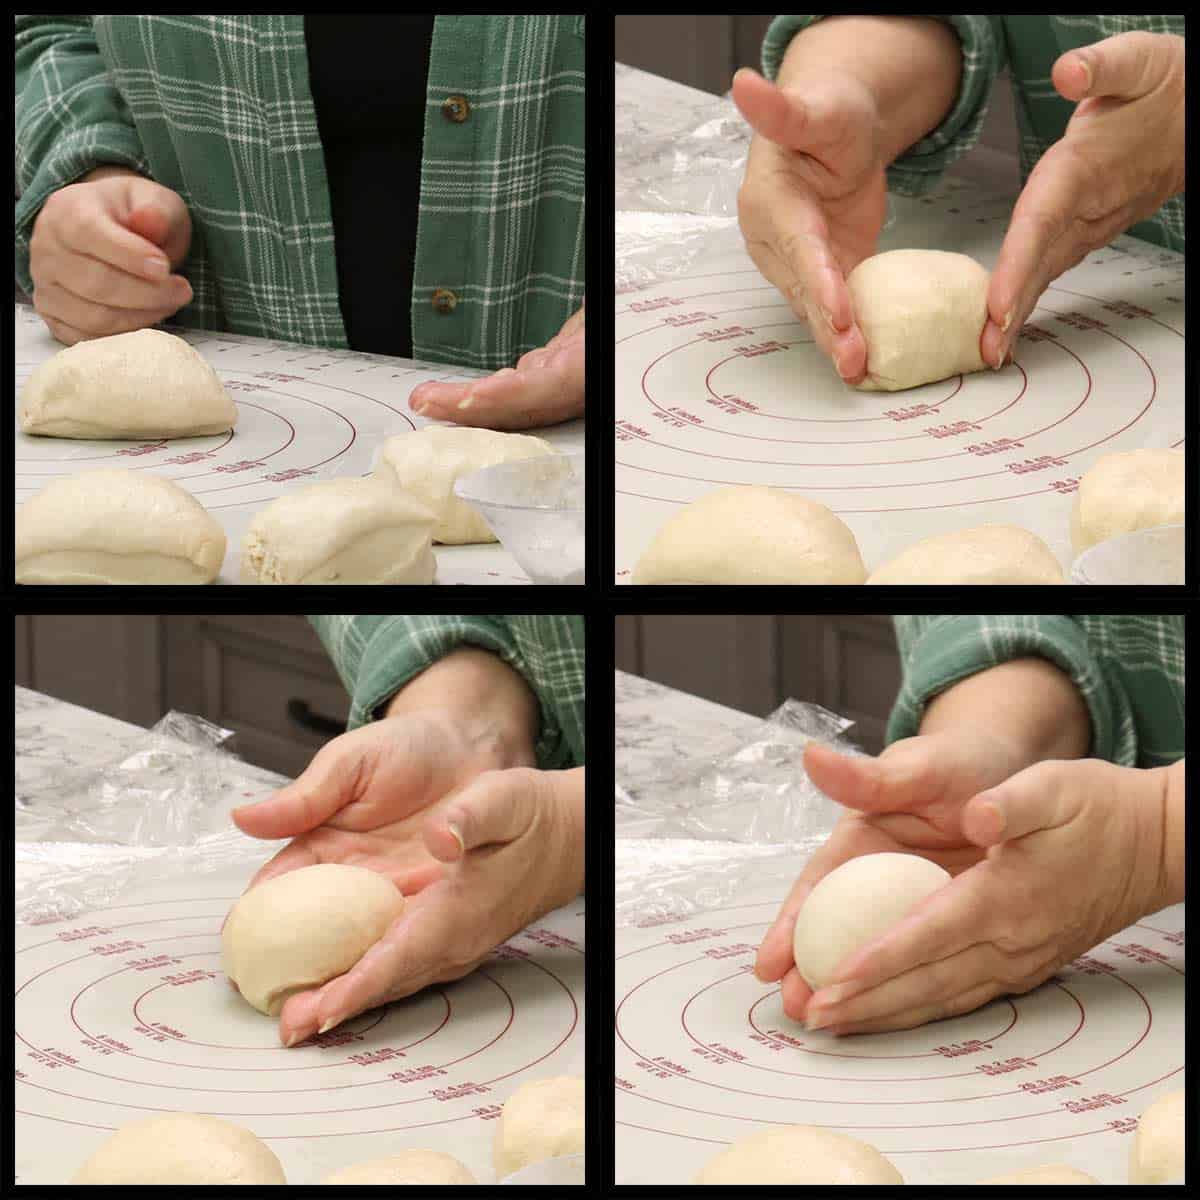 shaping the ball of dough to create tension on top.